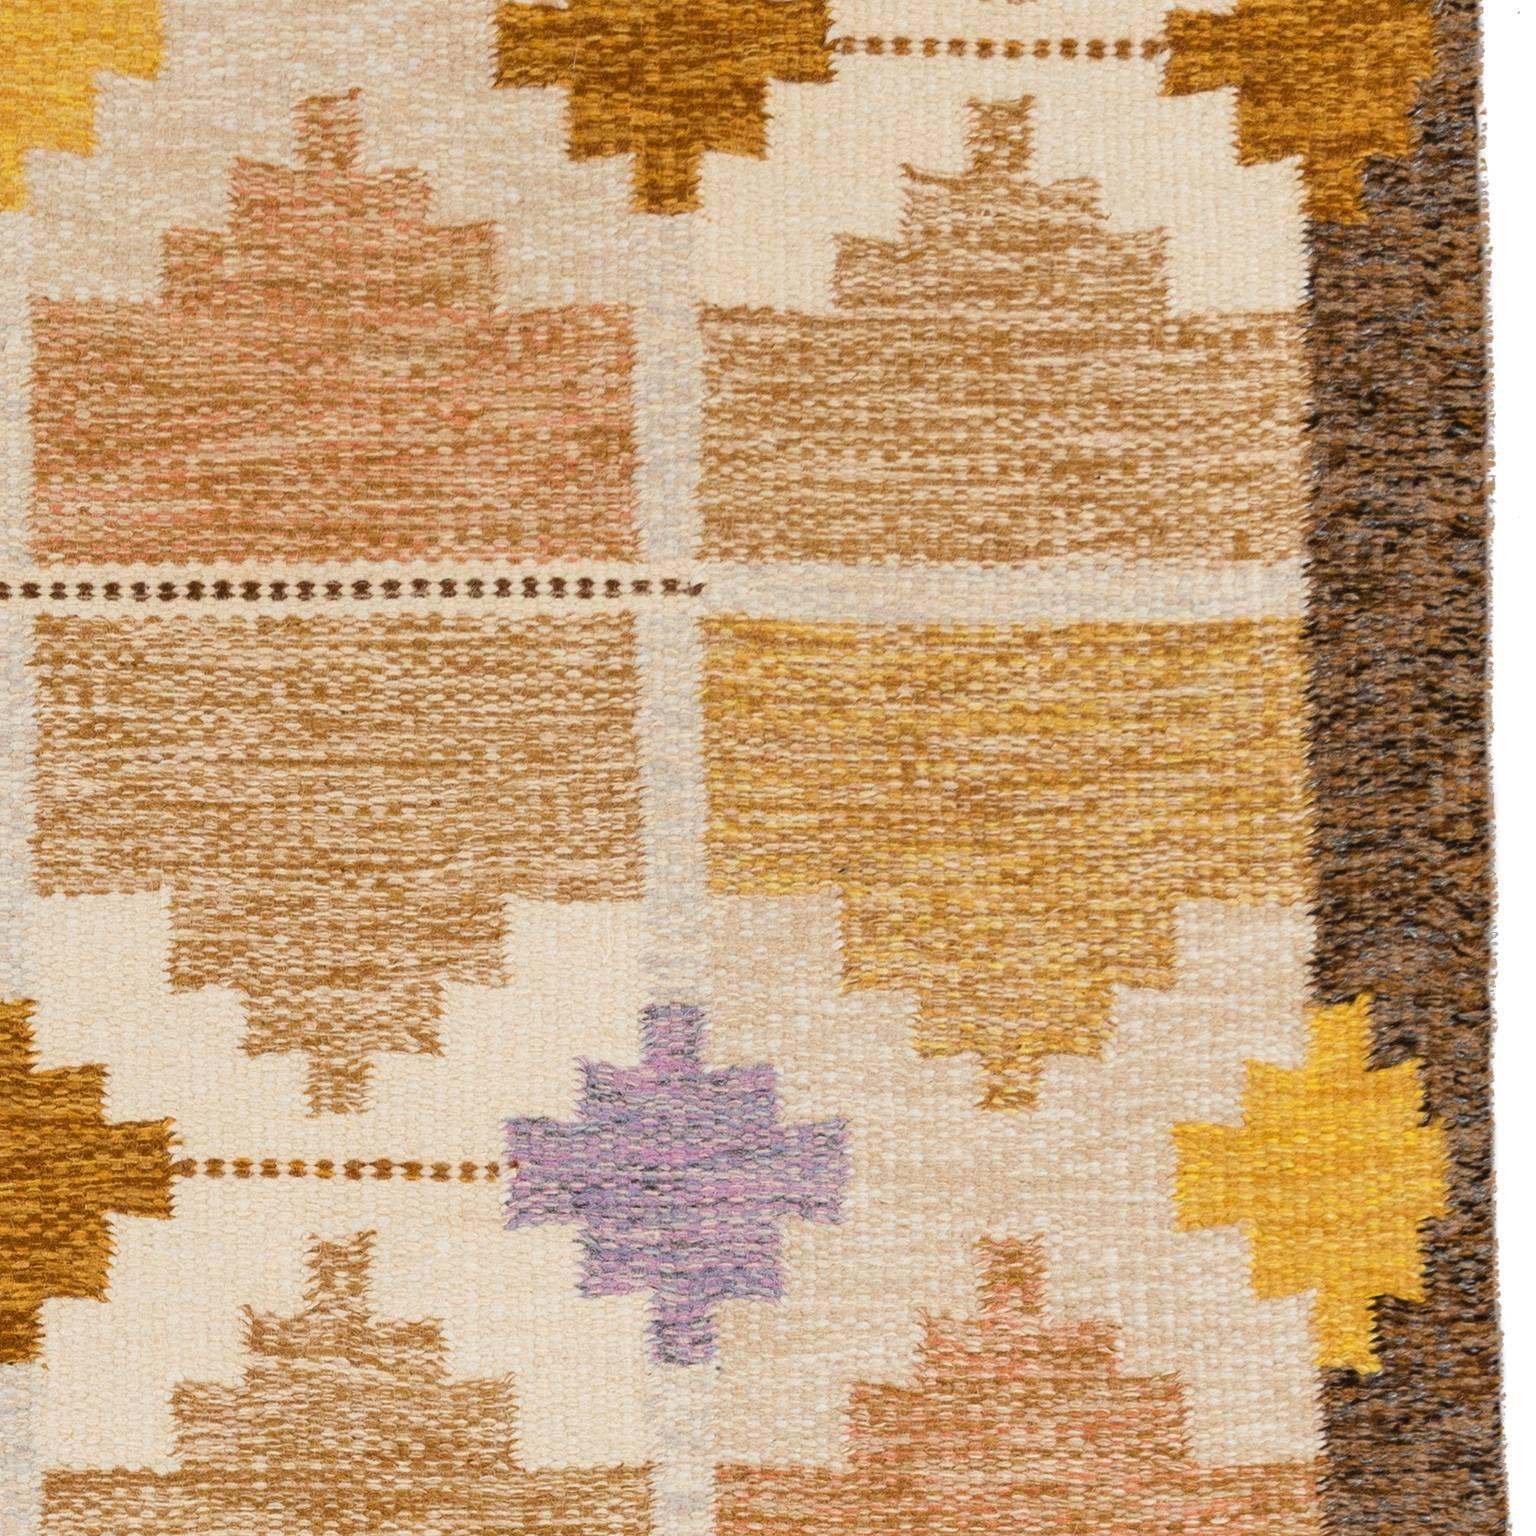 Hand-Woven Mid-20th Century Vintage Rug from Sweden, Signed Ingegerd Silow For Sale